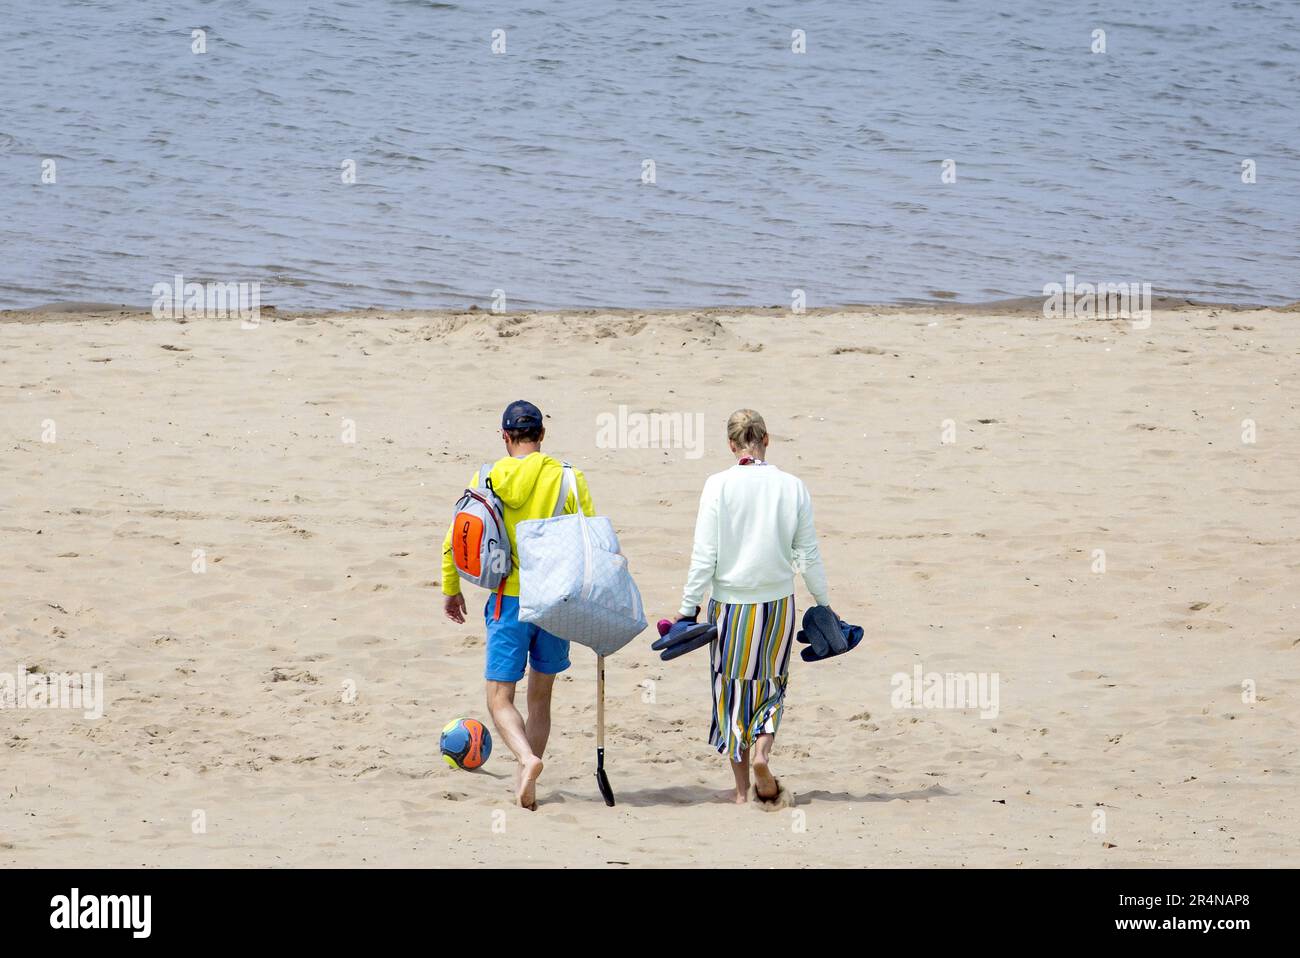 BLOEMENDAAL AAN ZEE - Day trippers on the beach on Whit Monday. Many people go out on this day off. ANP KOEN VAN WEEL netherlands out - belgium out Stock Photo